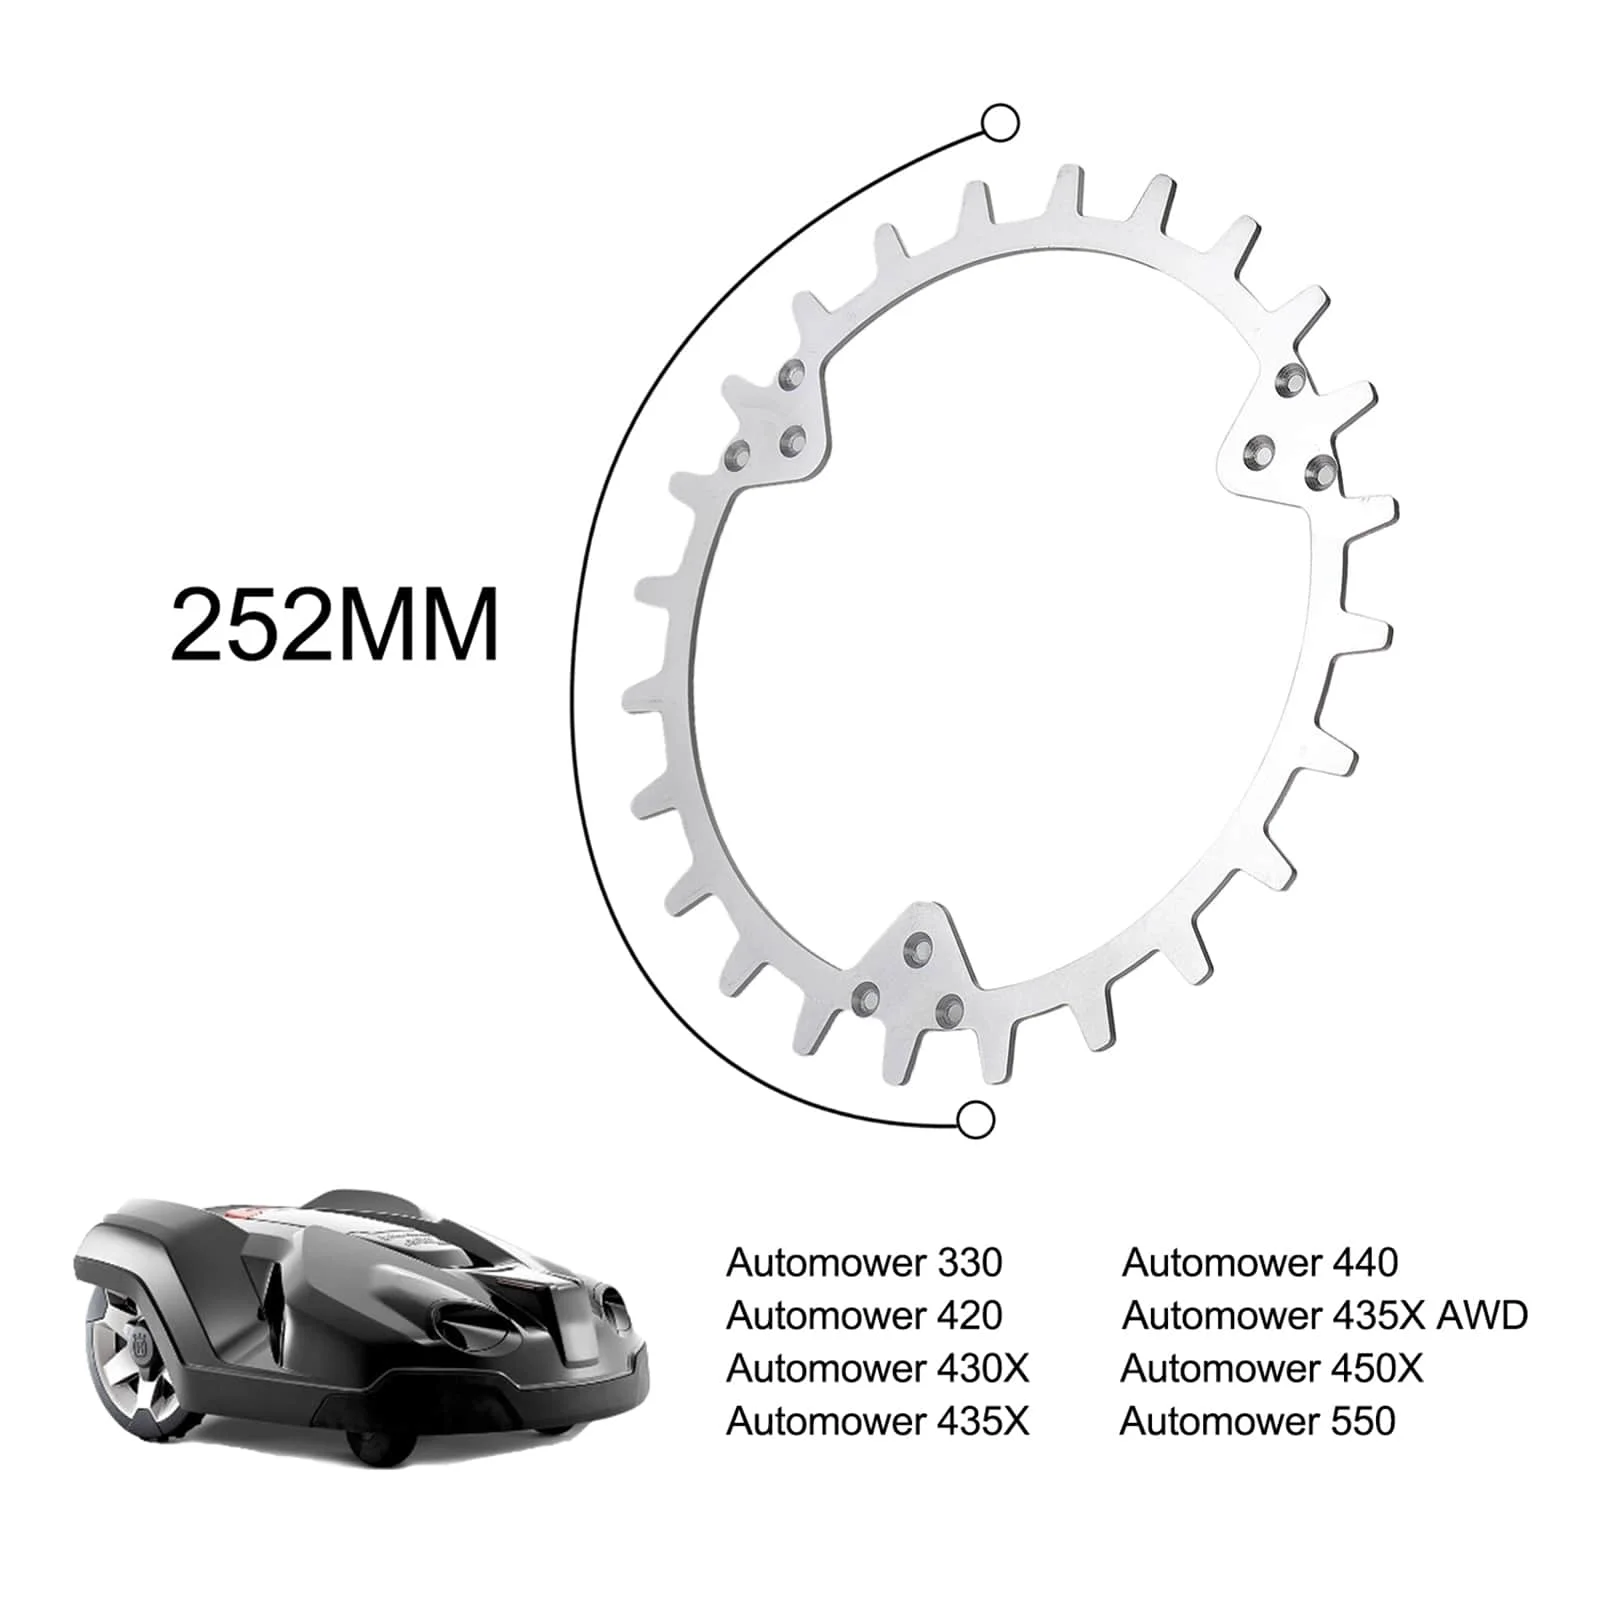 

2pcs Robotic Mower Traction Wheel Stainless Steel Robot Pulley For 420/320/430X/435X/440/450X Lawn Mower Traction Wheel